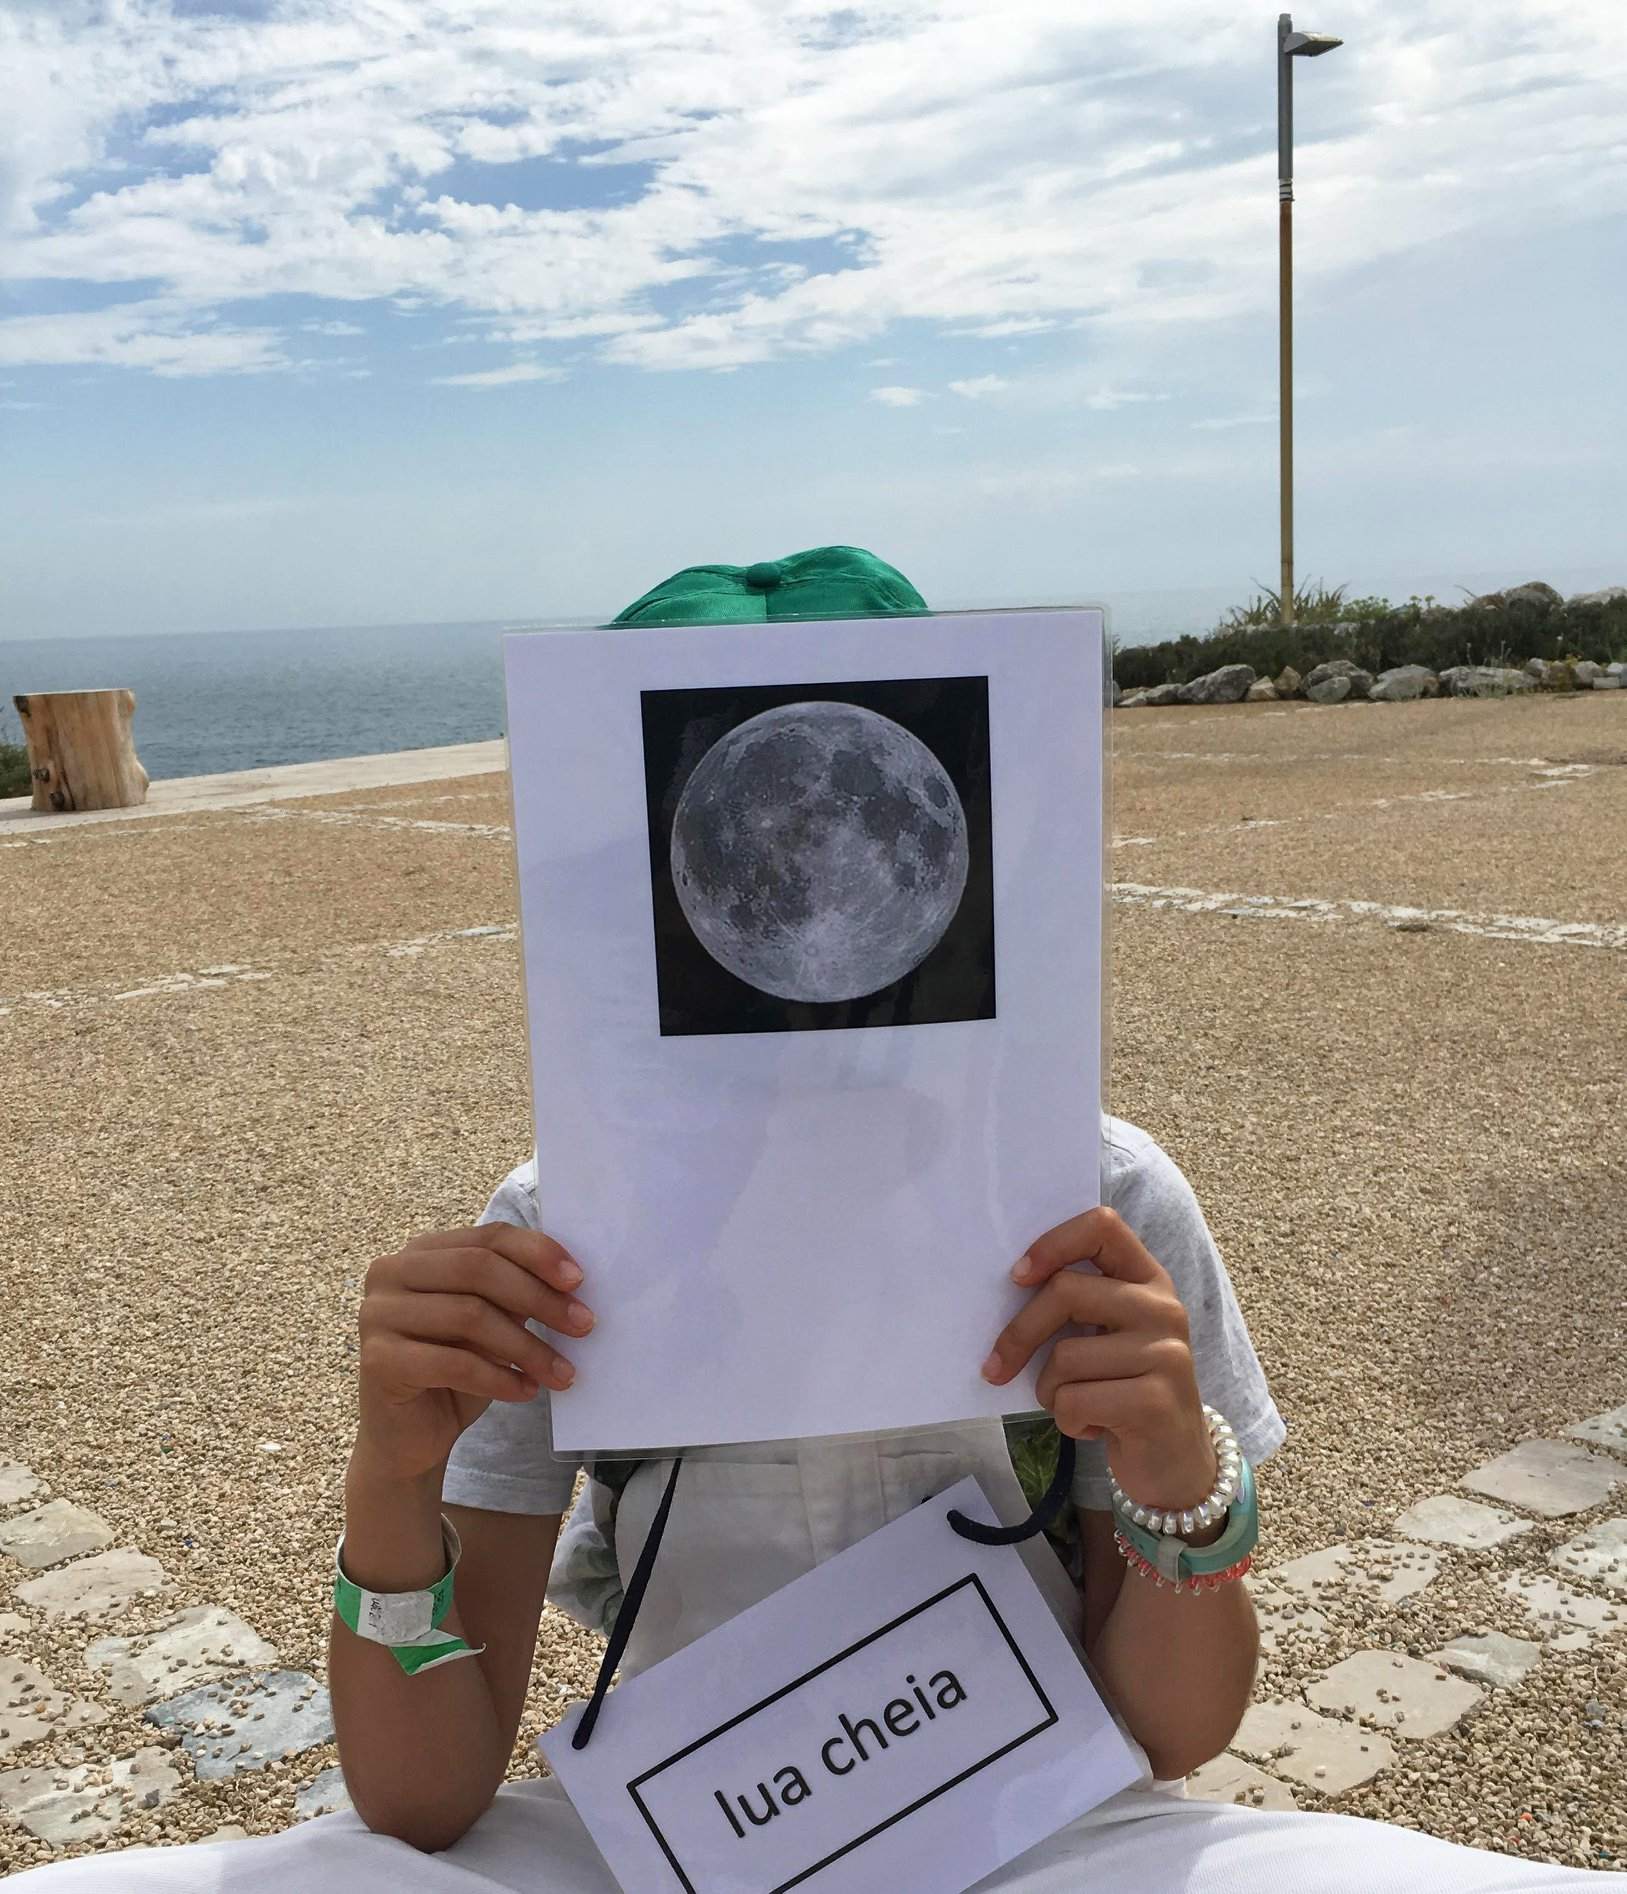 Crianças aprendem as fases da Lua. Children learn the phases of the Moon.